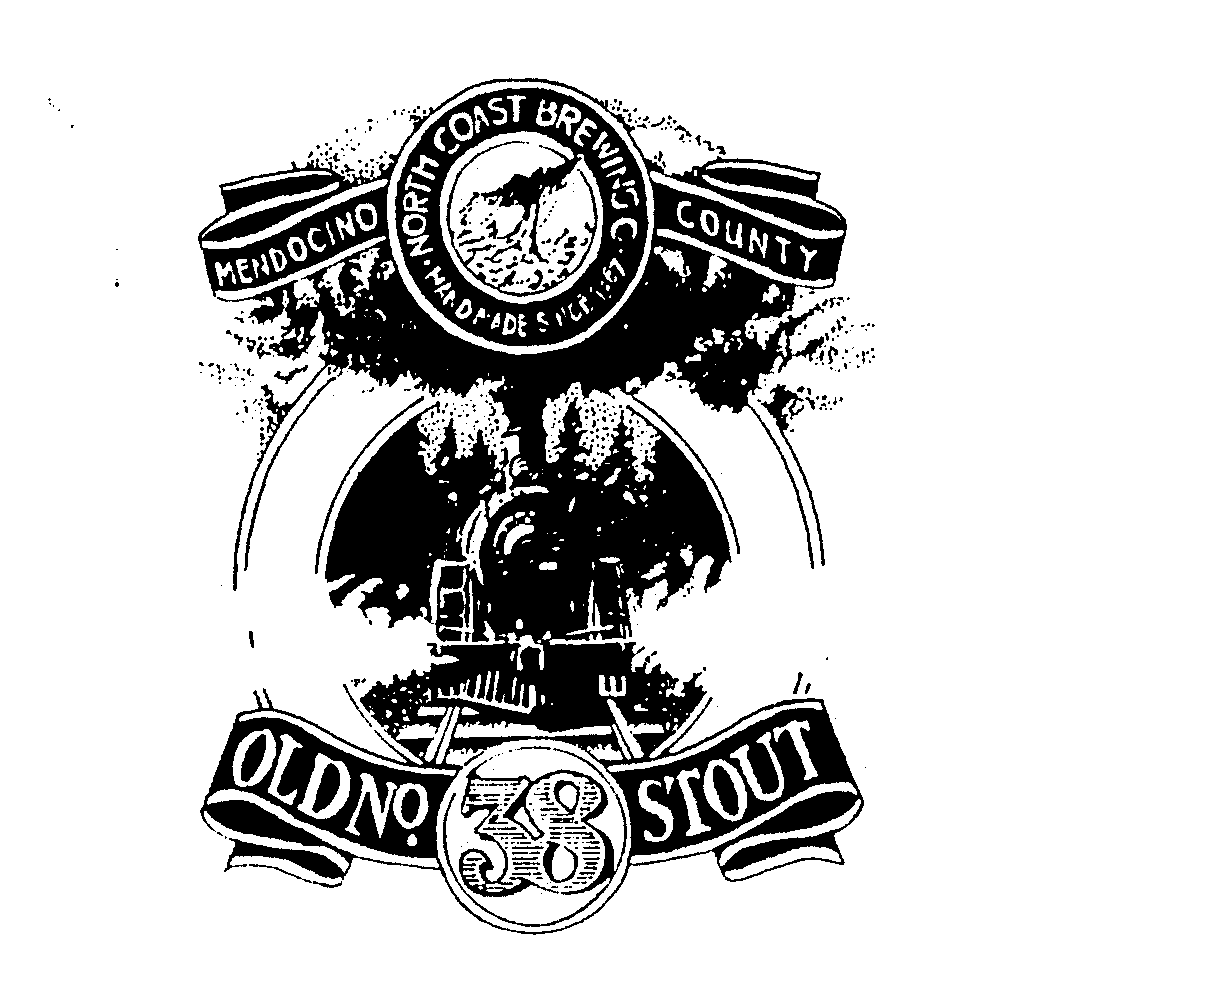  OLD NO. 38 STOUT NORTH COAST BREWING CO. HANDMADE SINCE 1987 MENDOCINO COUNTY